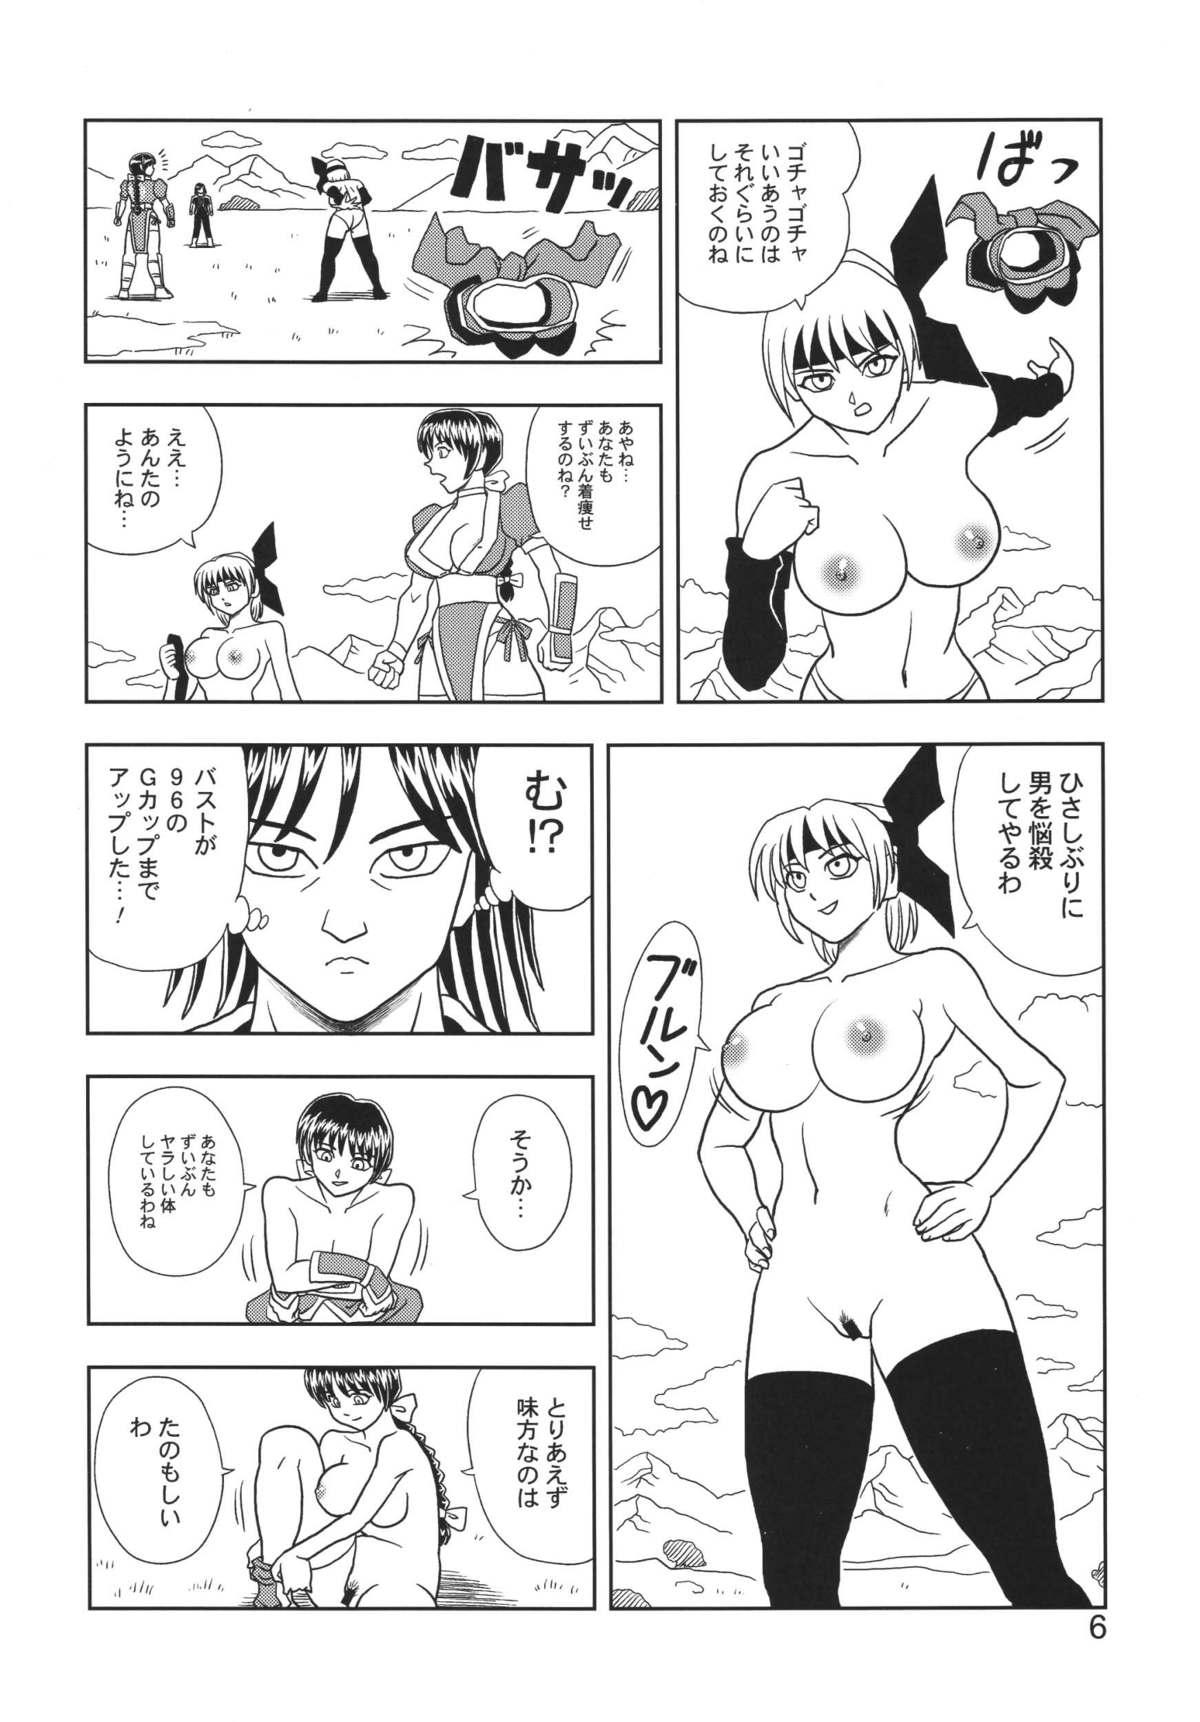 Shemales Kasumi or Ayane - Dead or alive Pica - Page 6